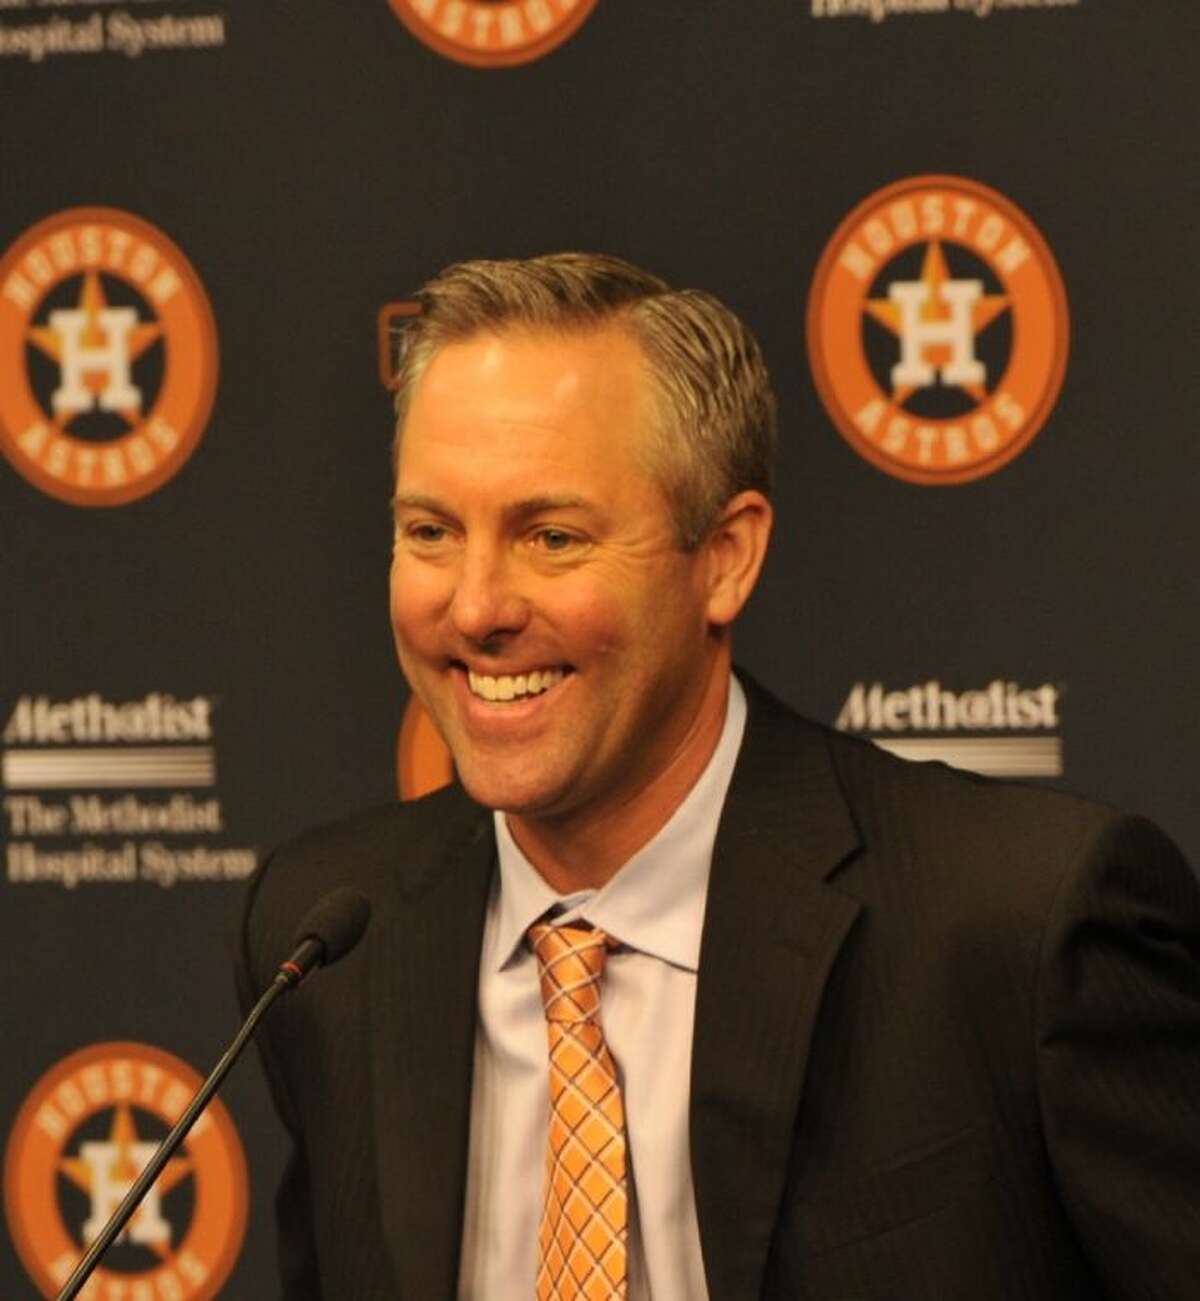 The Chamber’s upcoming Third Tuesday Luncheon Presented by Memorial Hermann Northeast will feature Reid Ryan, President of Business Operations for the Astros and son of baseball great Nolan Ryan, as he shares his vision to rebuild the hometown team.